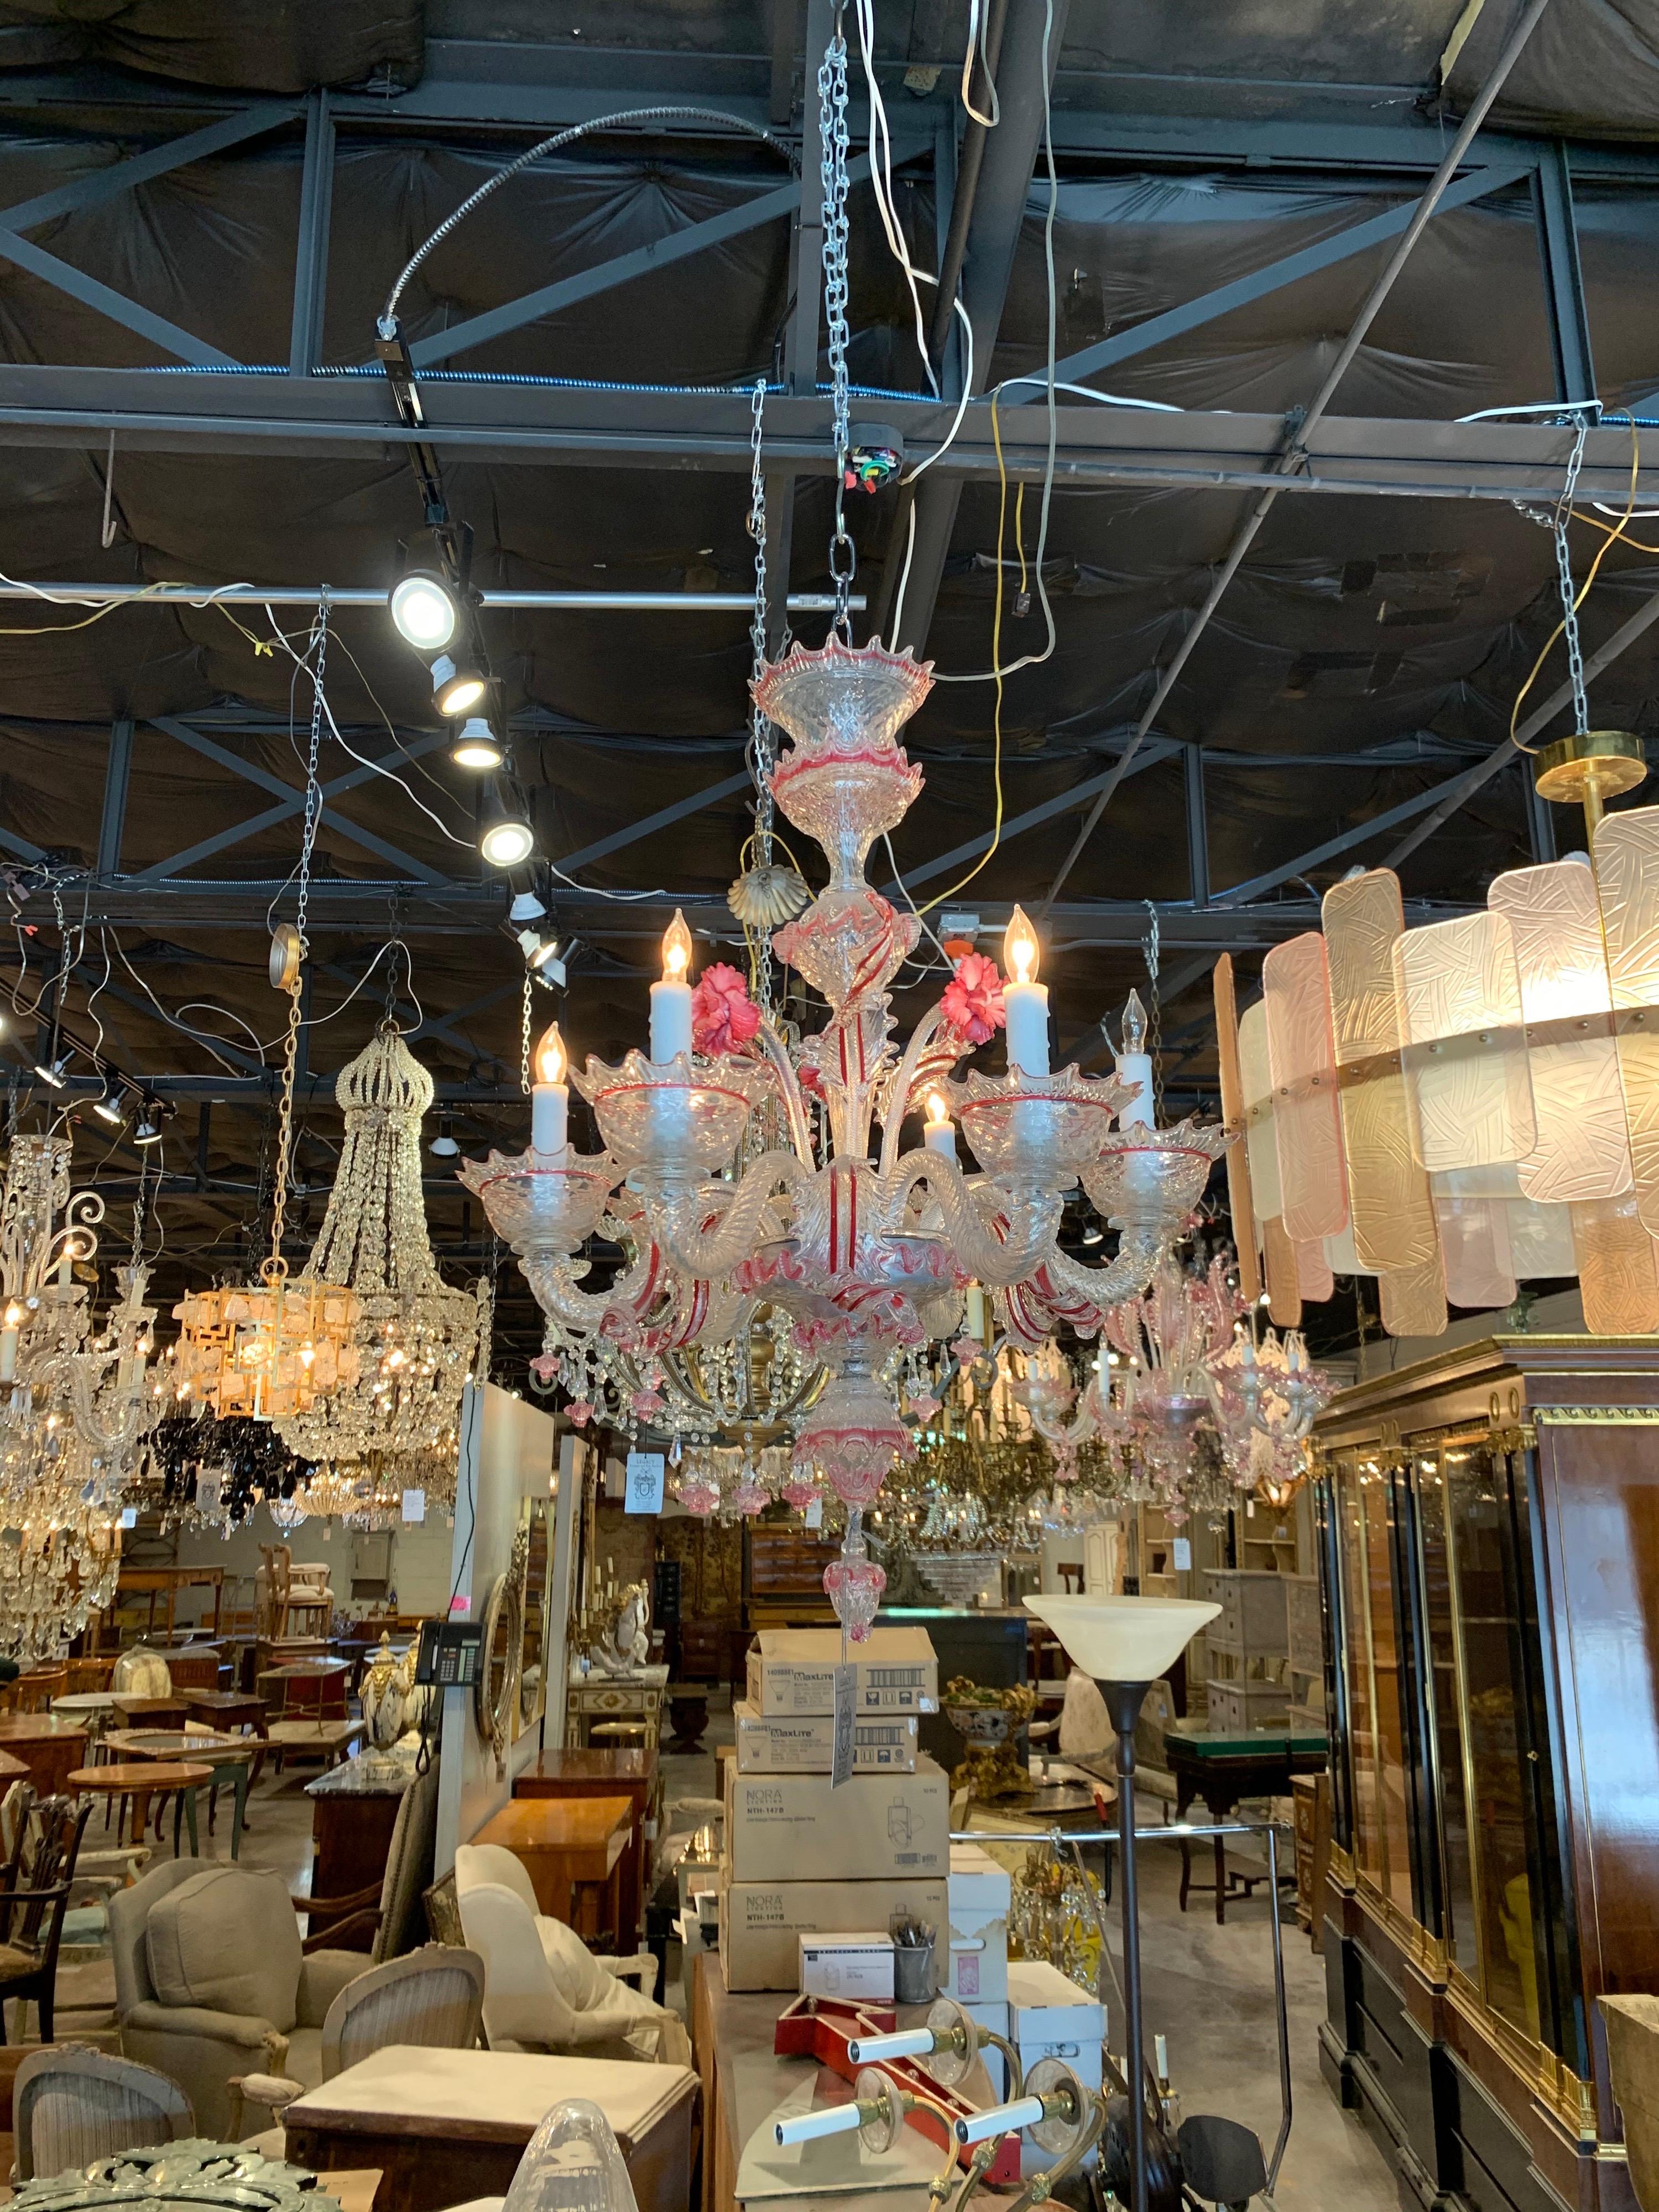 Lovely early 20th century 6-light Venetian chandelier. The fixture has pretty pink details along with beautiful pink and white flowers. A fabulous decorative piece!